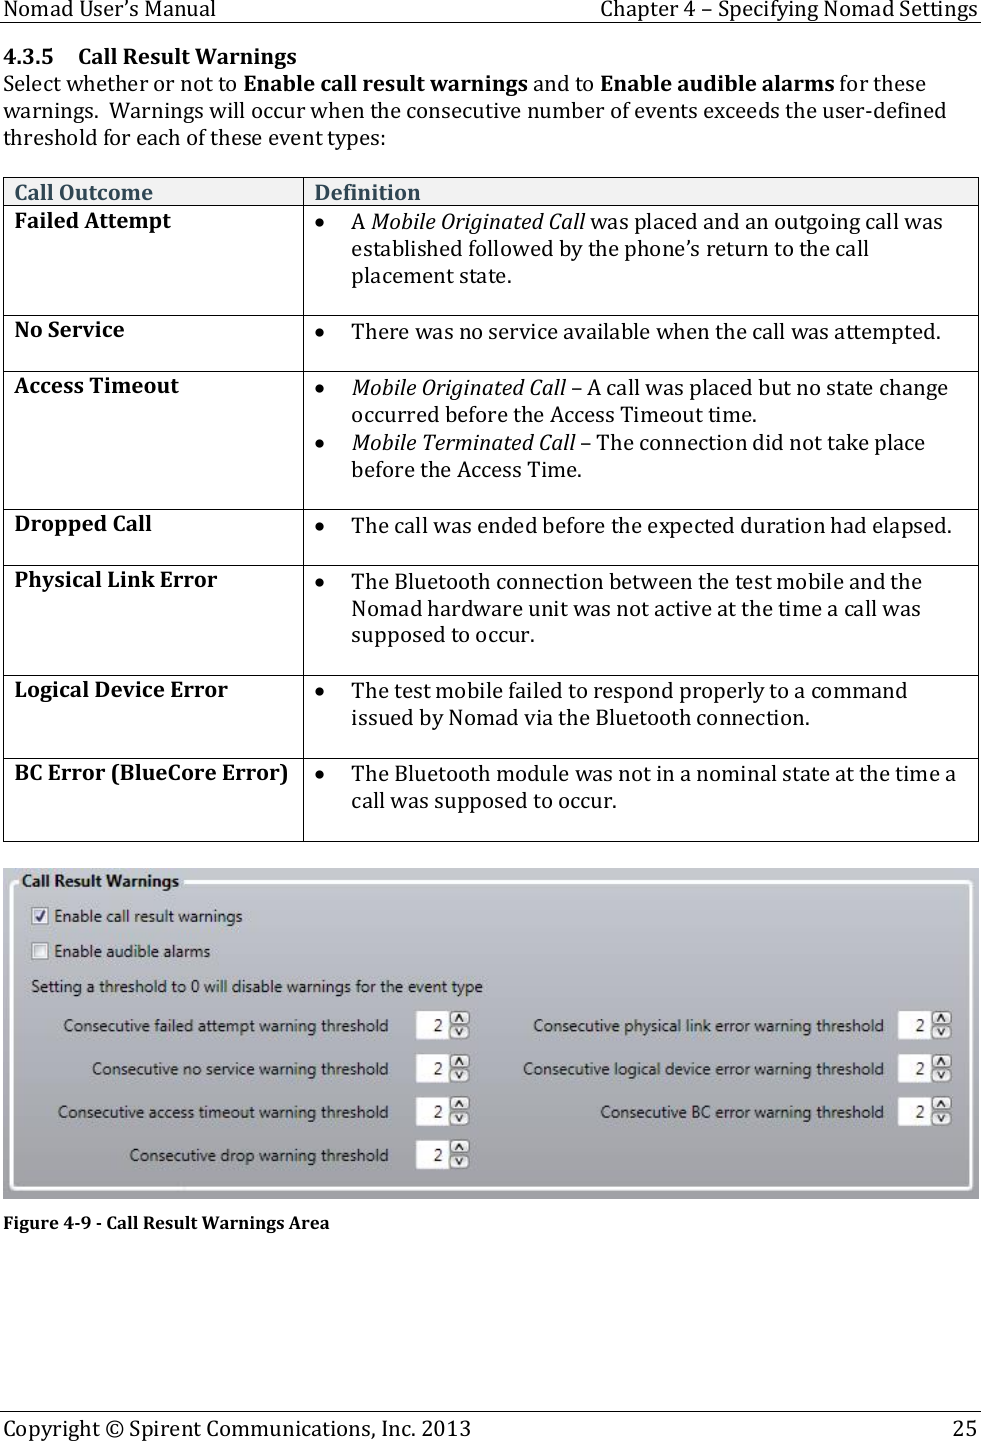  Nomad User’s Manual  Chapter 4 – Specifying Nomad Settings Copyright © Spirent Communications, Inc. 2013    25  4.3.5 Call Result Warnings Select whether or not to Enable call result warnings and to Enable audible alarms for these warnings.  Warnings will occur when the consecutive number of events exceeds the user-defined threshold for each of these event types:    Call Outcome Definition Failed Attempt  A Mobile Originated Call was placed and an outgoing call was established followed by the phone’s return to the call placement state.  No Service  There was no service available when the call was attempted.  Access Timeout  Mobile Originated Call – A call was placed but no state change occurred before the Access Timeout time.  Mobile Terminated Call – The connection did not take place before the Access Time.  Dropped Call  The call was ended before the expected duration had elapsed.  Physical Link Error  The Bluetooth connection between the test mobile and the Nomad hardware unit was not active at the time a call was supposed to occur.  Logical Device Error  The test mobile failed to respond properly to a command issued by Nomad via the Bluetooth connection.  BC Error (BlueCore Error)  The Bluetooth module was not in a nominal state at the time a call was supposed to occur.    Figure 4-9 - Call Result Warnings Area   